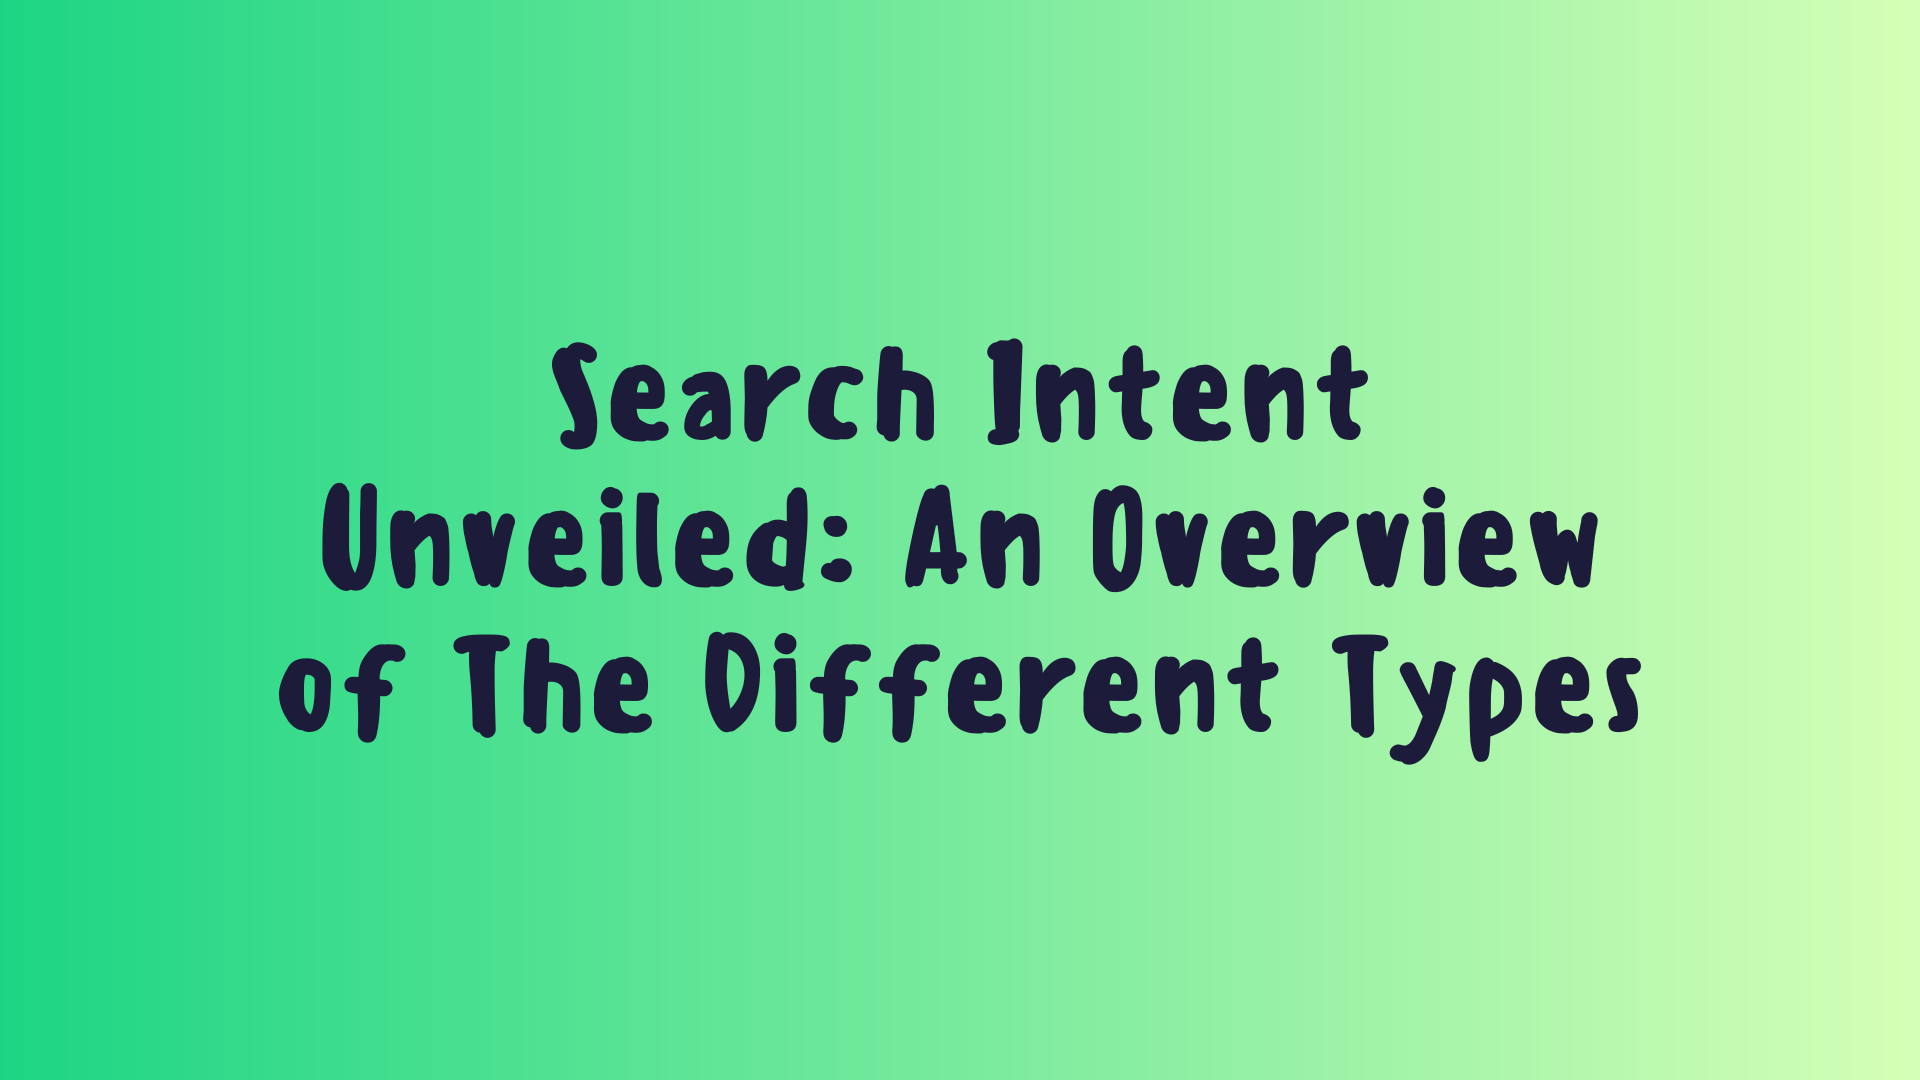 Search Intent Unveiled: An Overview of The Different Types